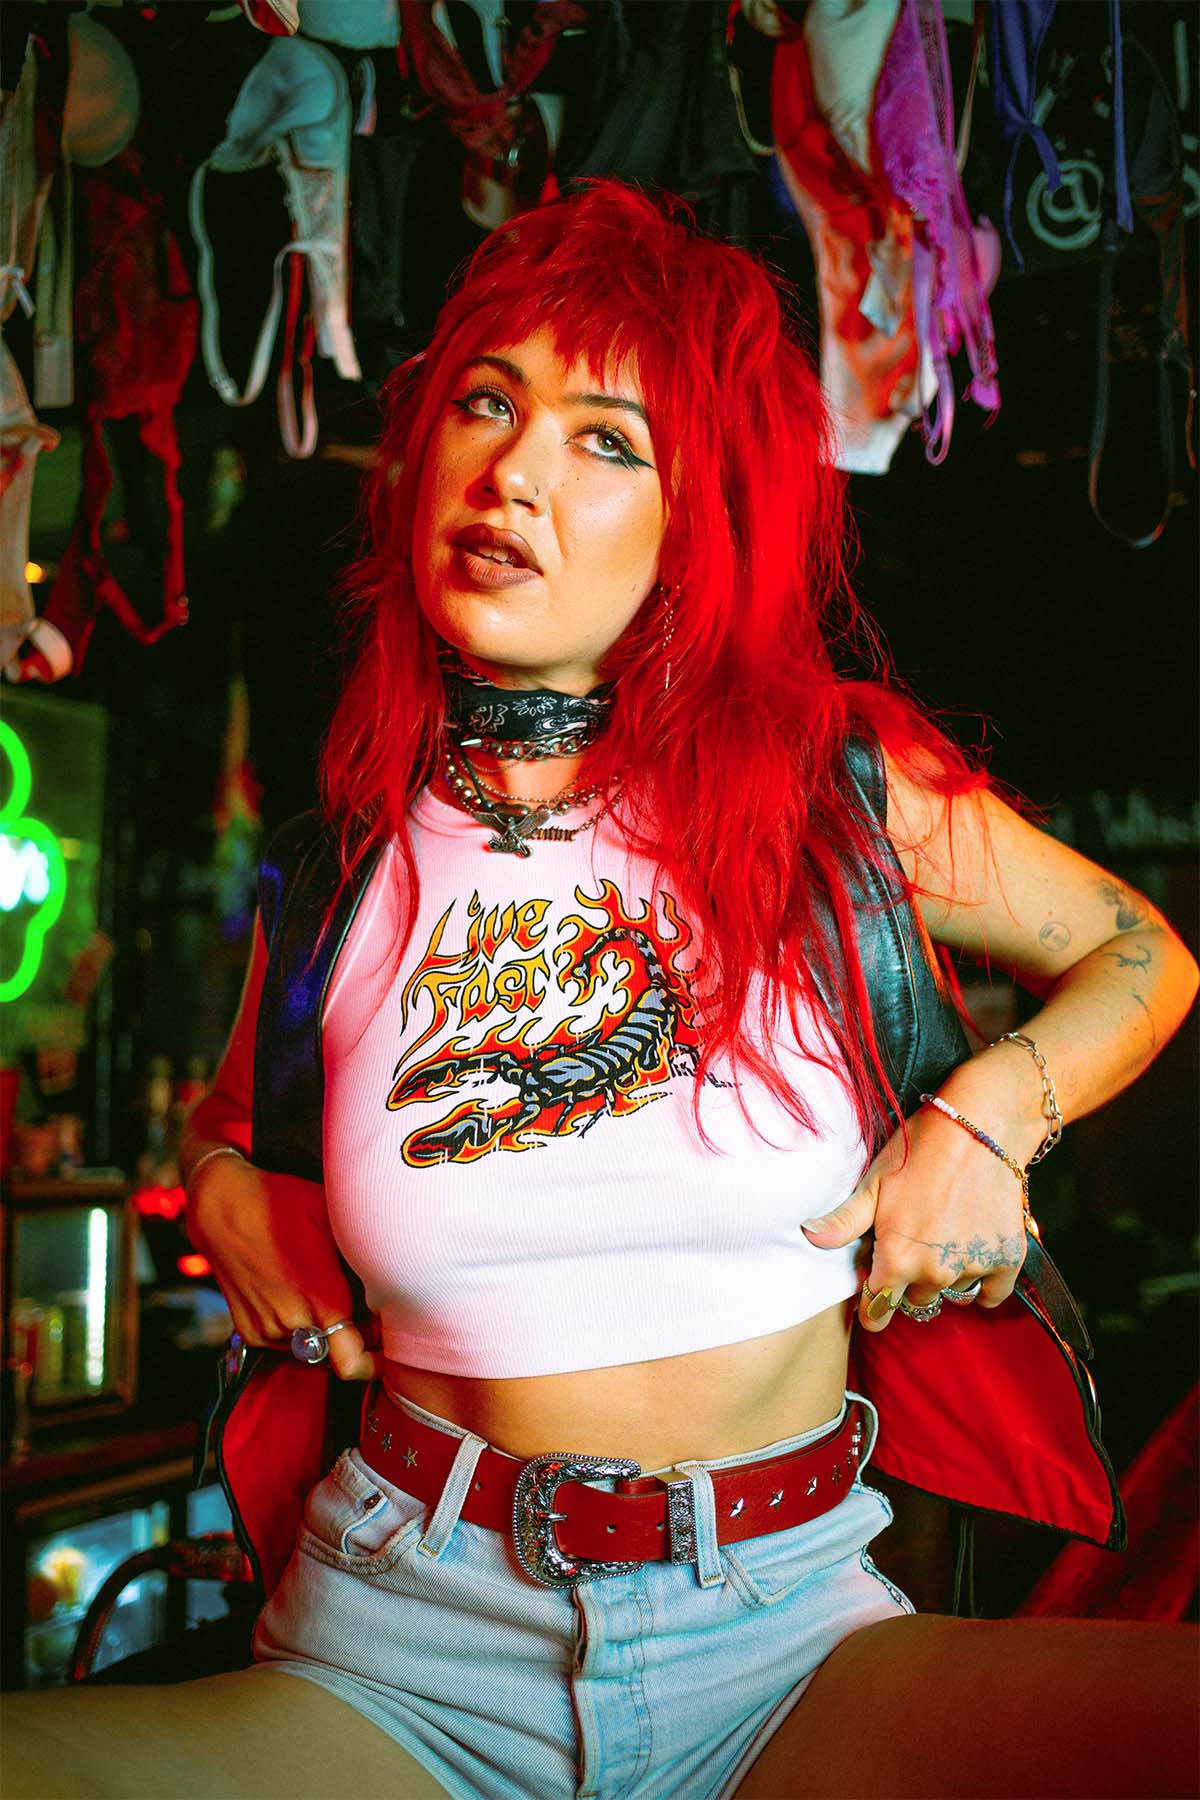 Amy Valentine wearing a Sleazy Rider scorpion tank top in a dive bar